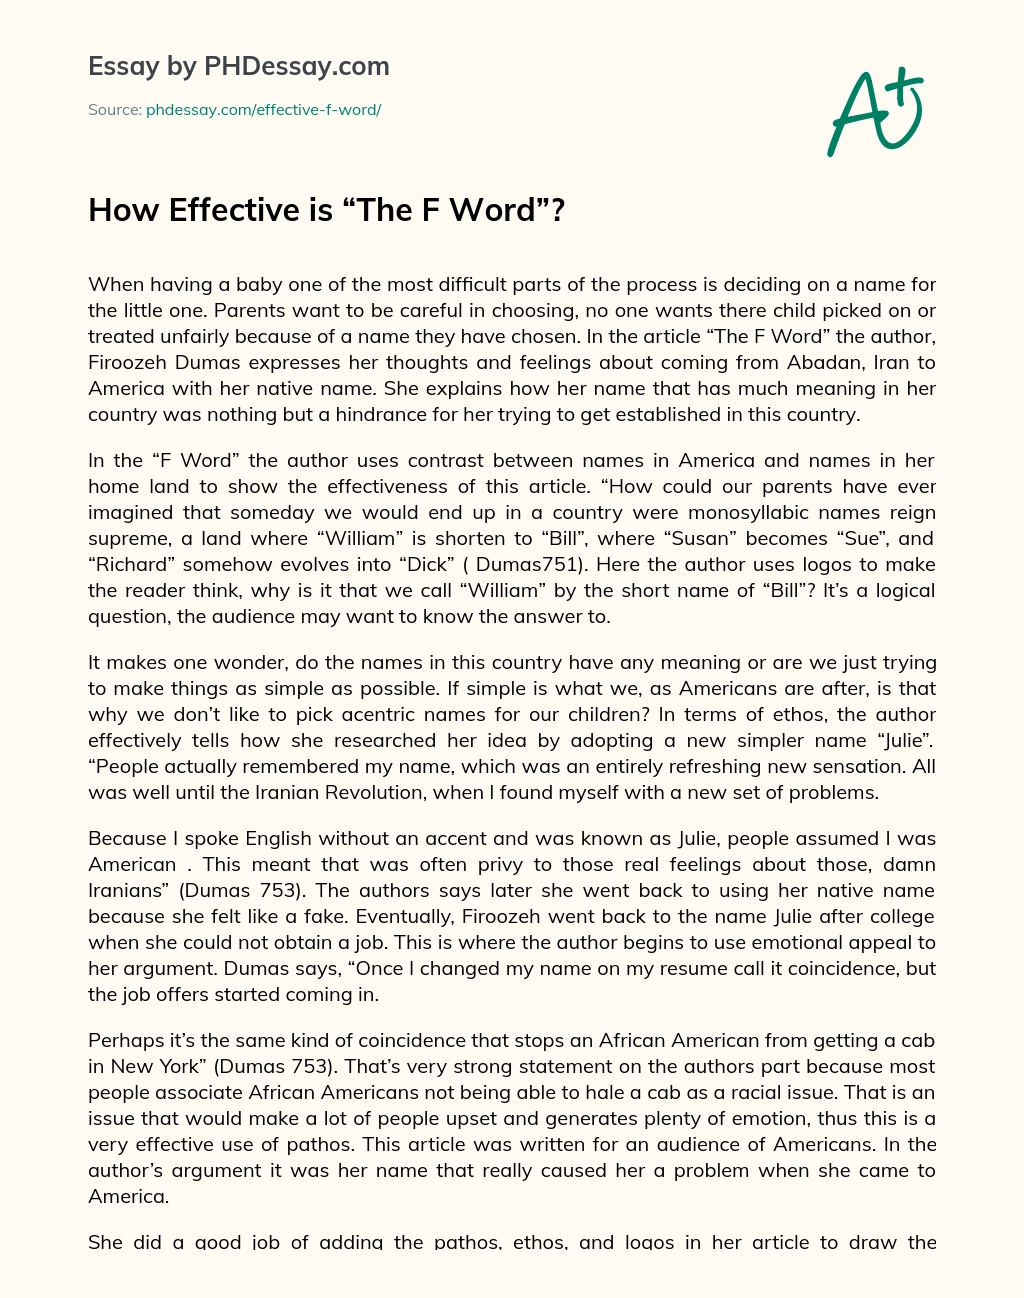 How Effective is “The F Word”? essay